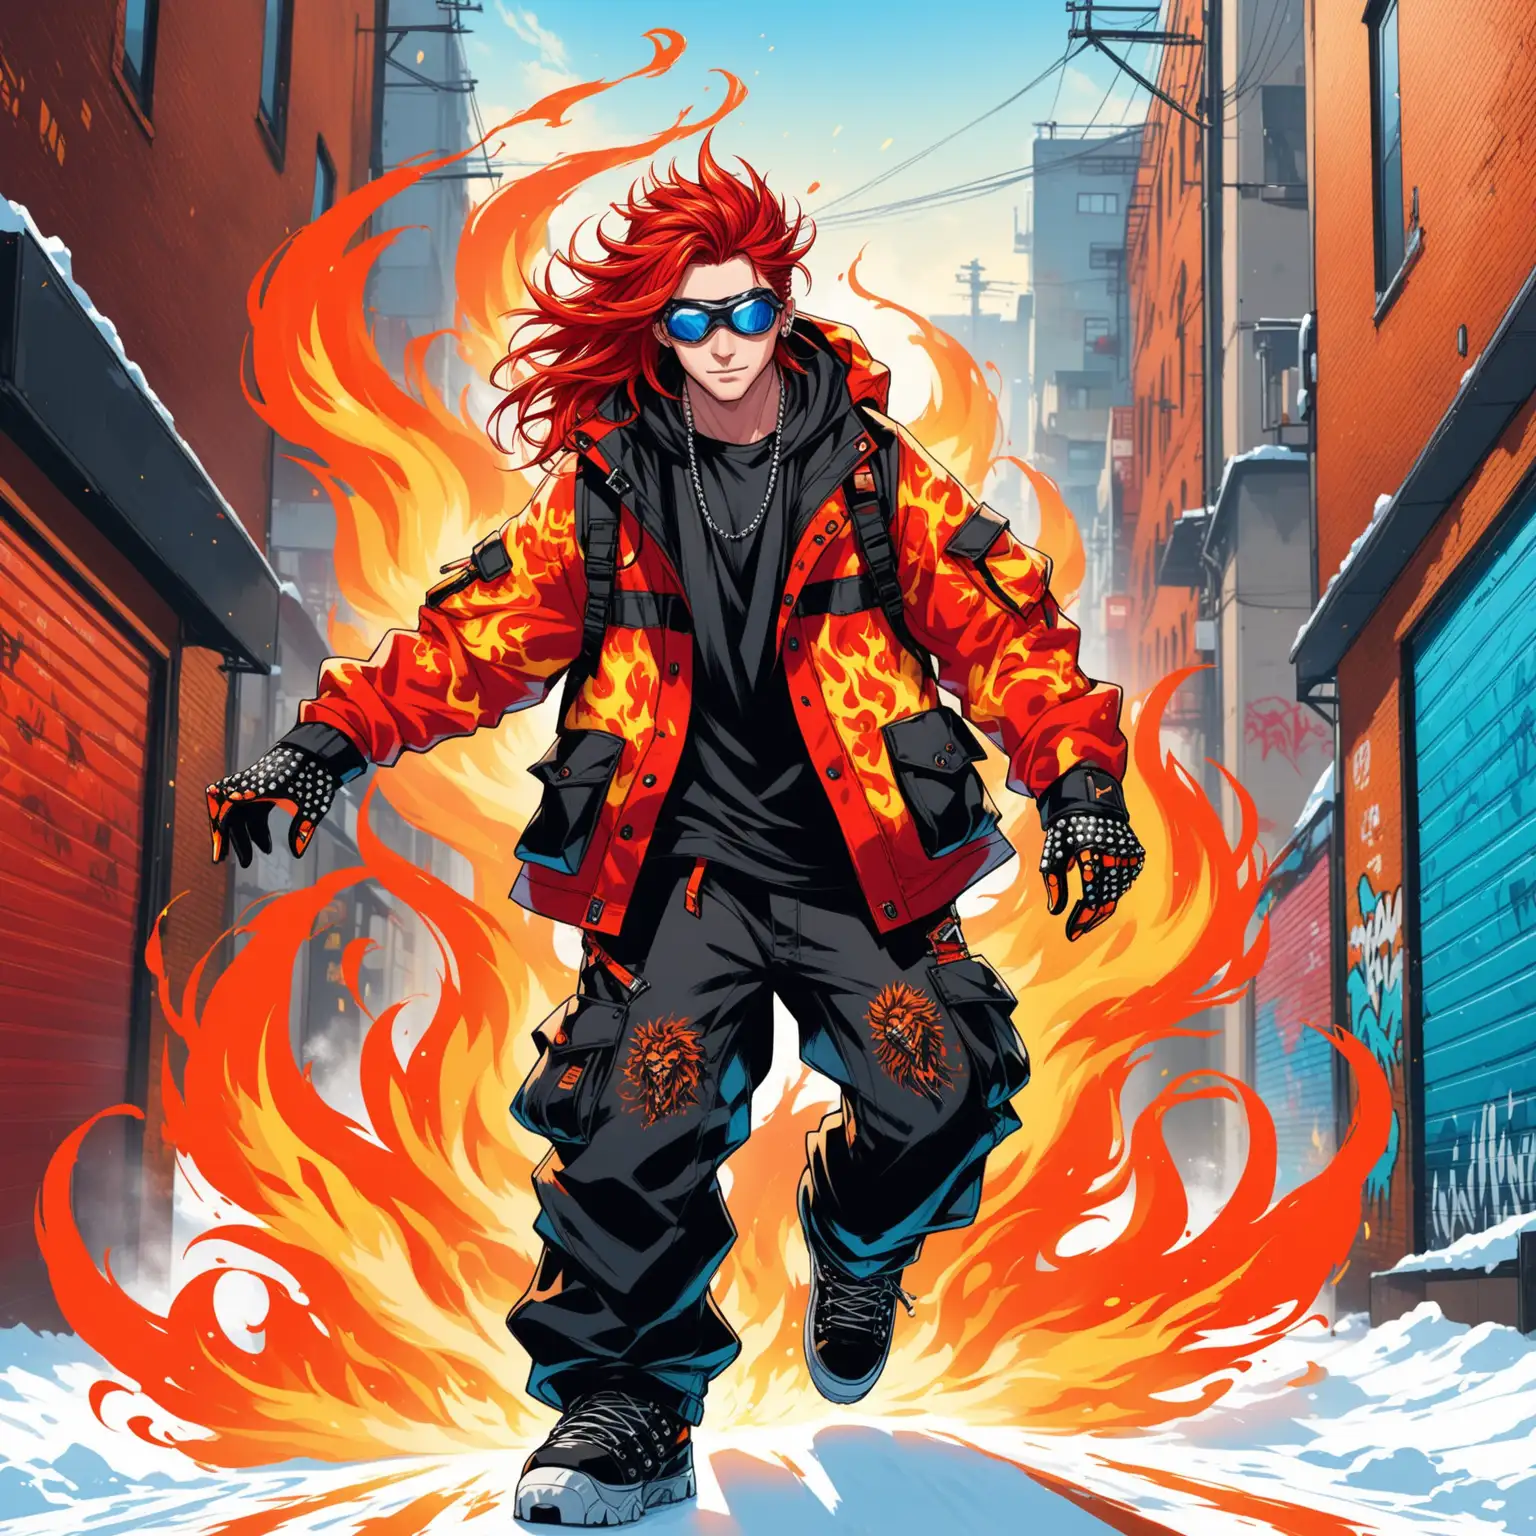 Rebellious Rockstar Snowboarder with Fiery Red Hair and Urban Street Style